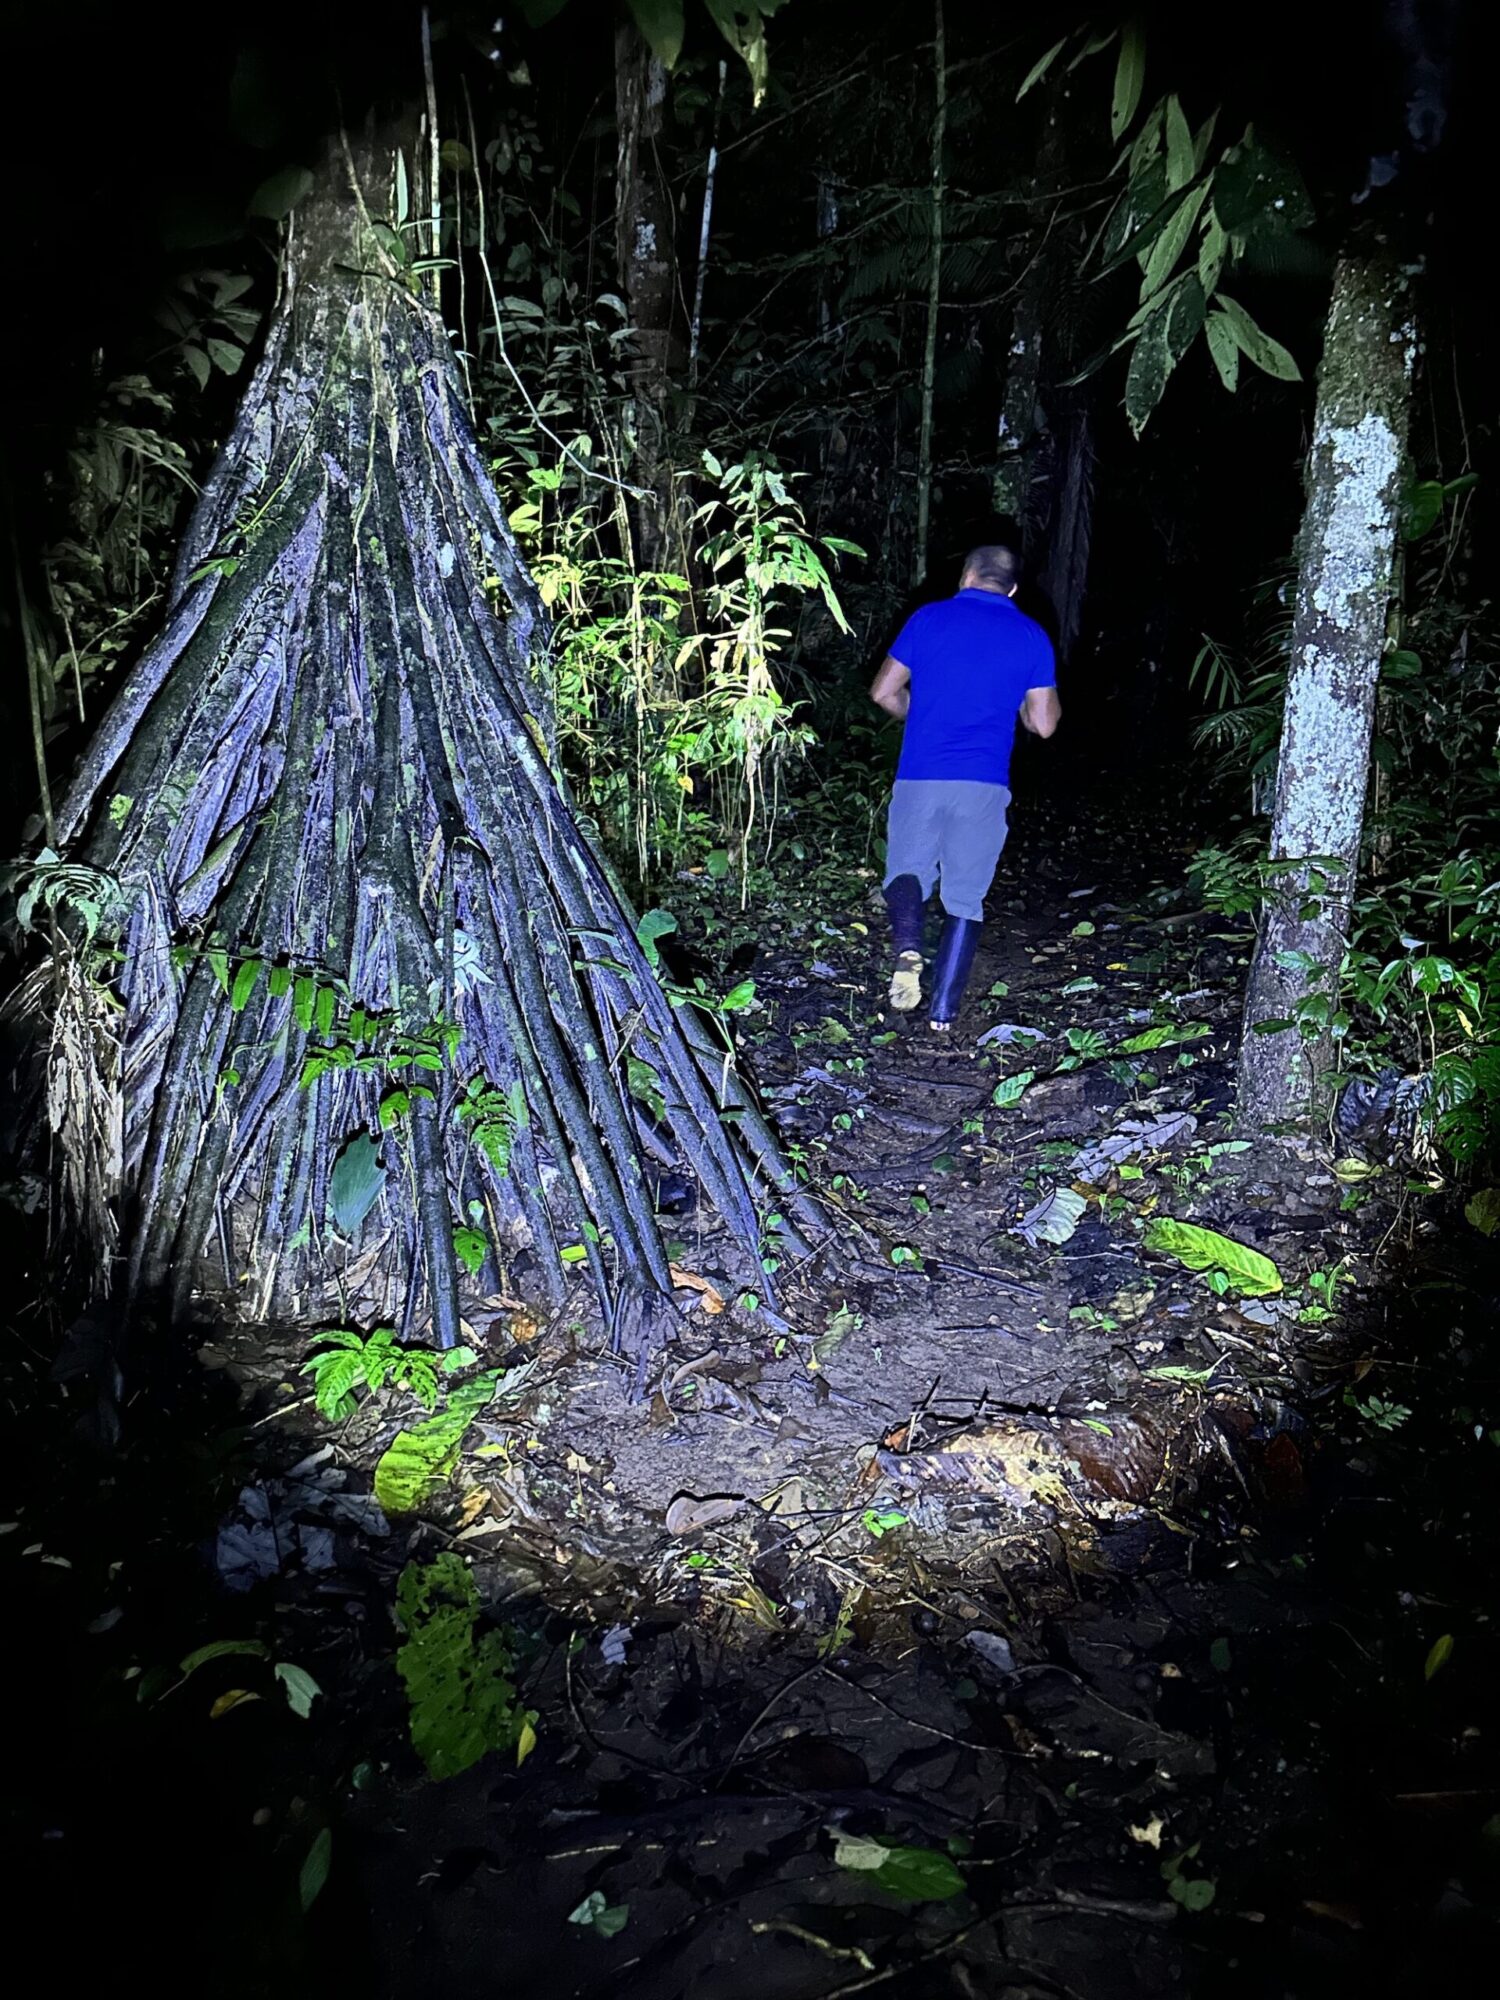 A man in Ecuador walks in the forest at night.